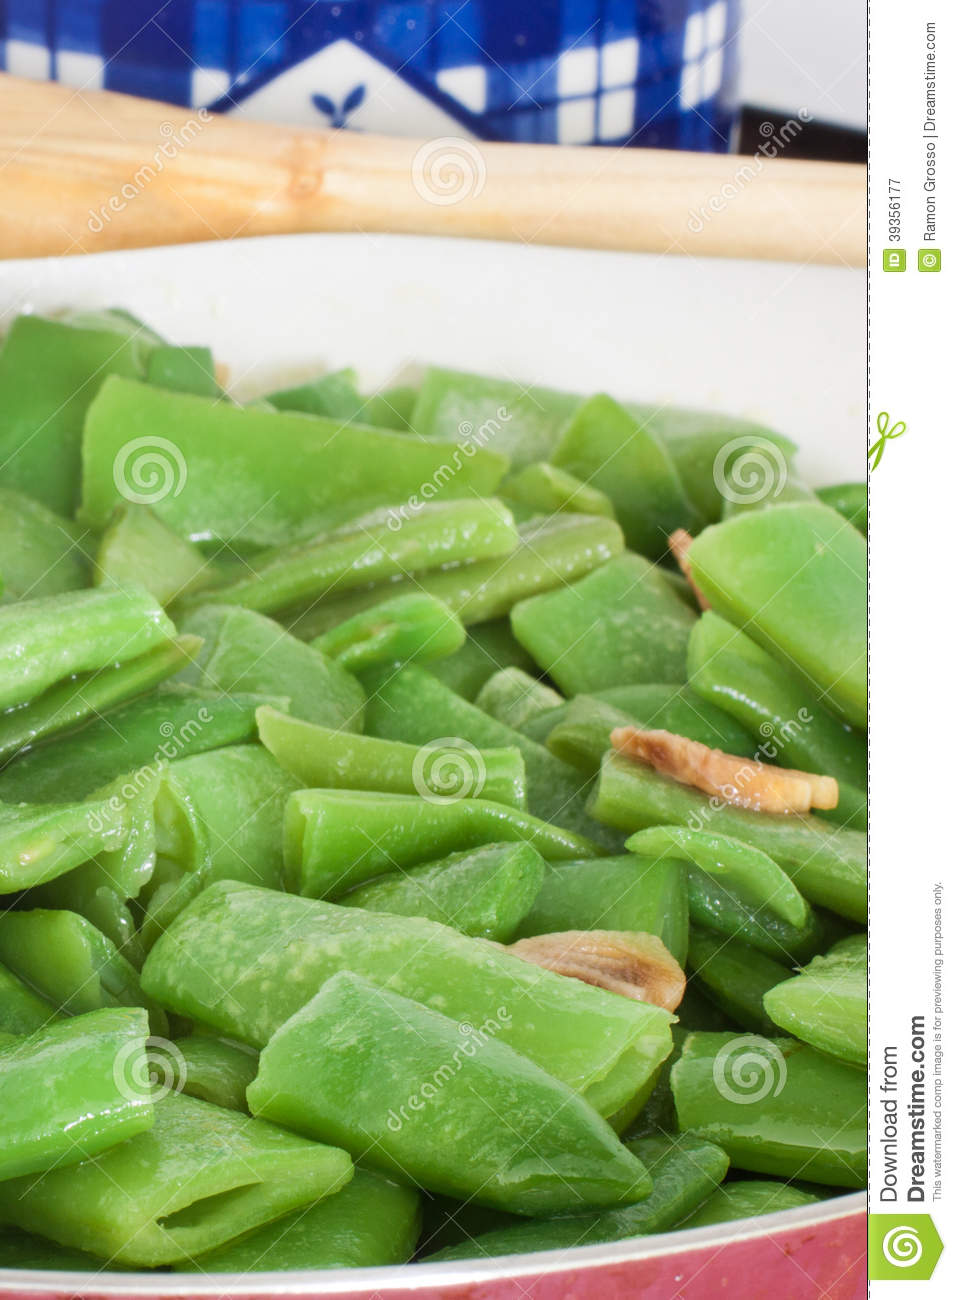 Green Beans Stock Photo   Image  39356177